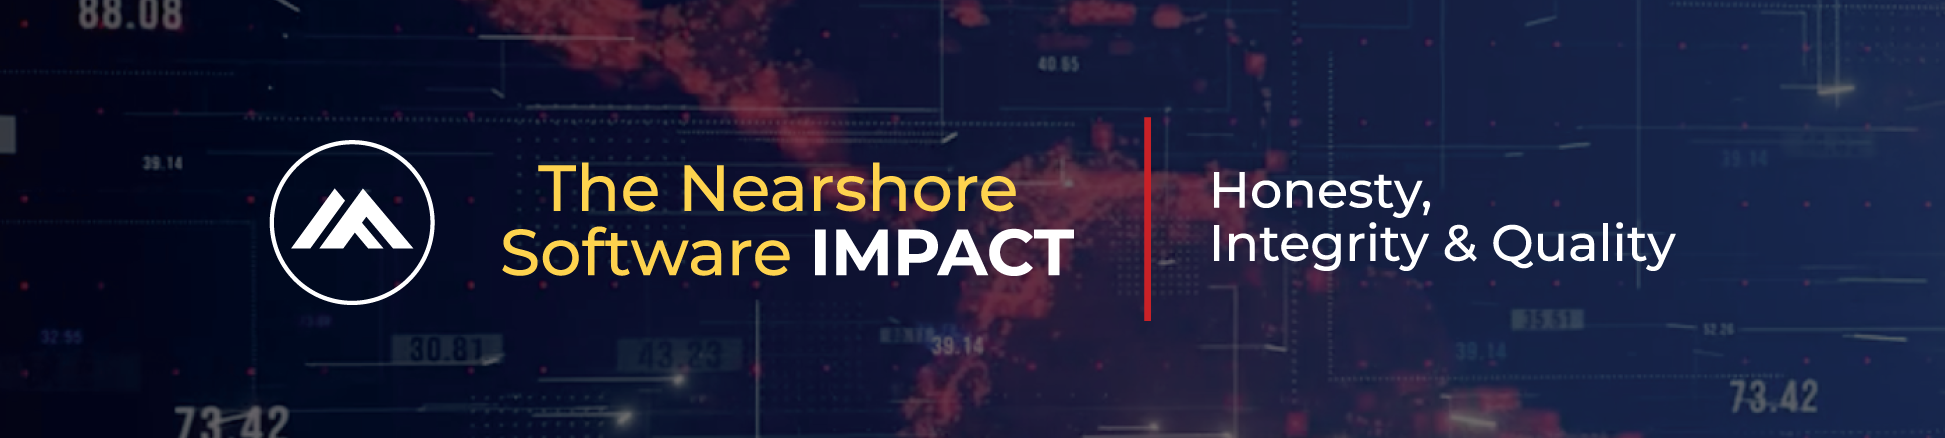 Banner that says The Nearshore Software Impact